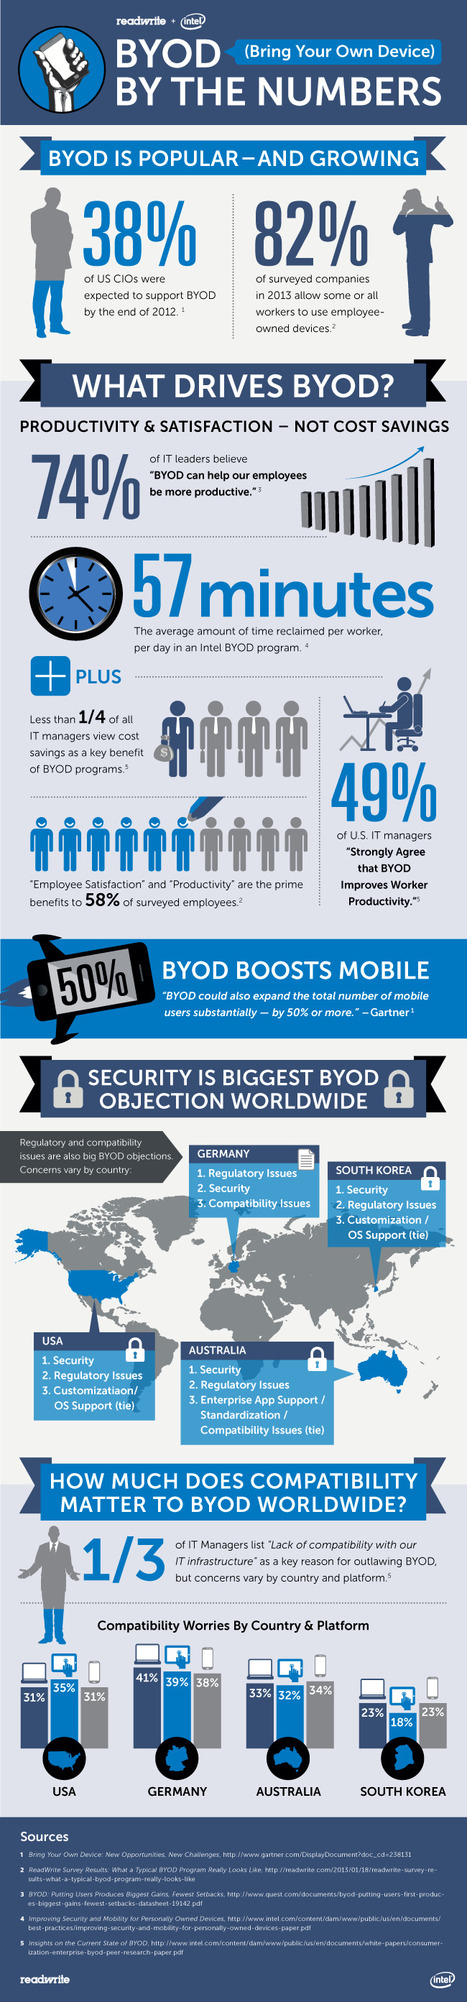 BYOD By The Numbers [Infographic] | Education & Numérique | Scoop.it